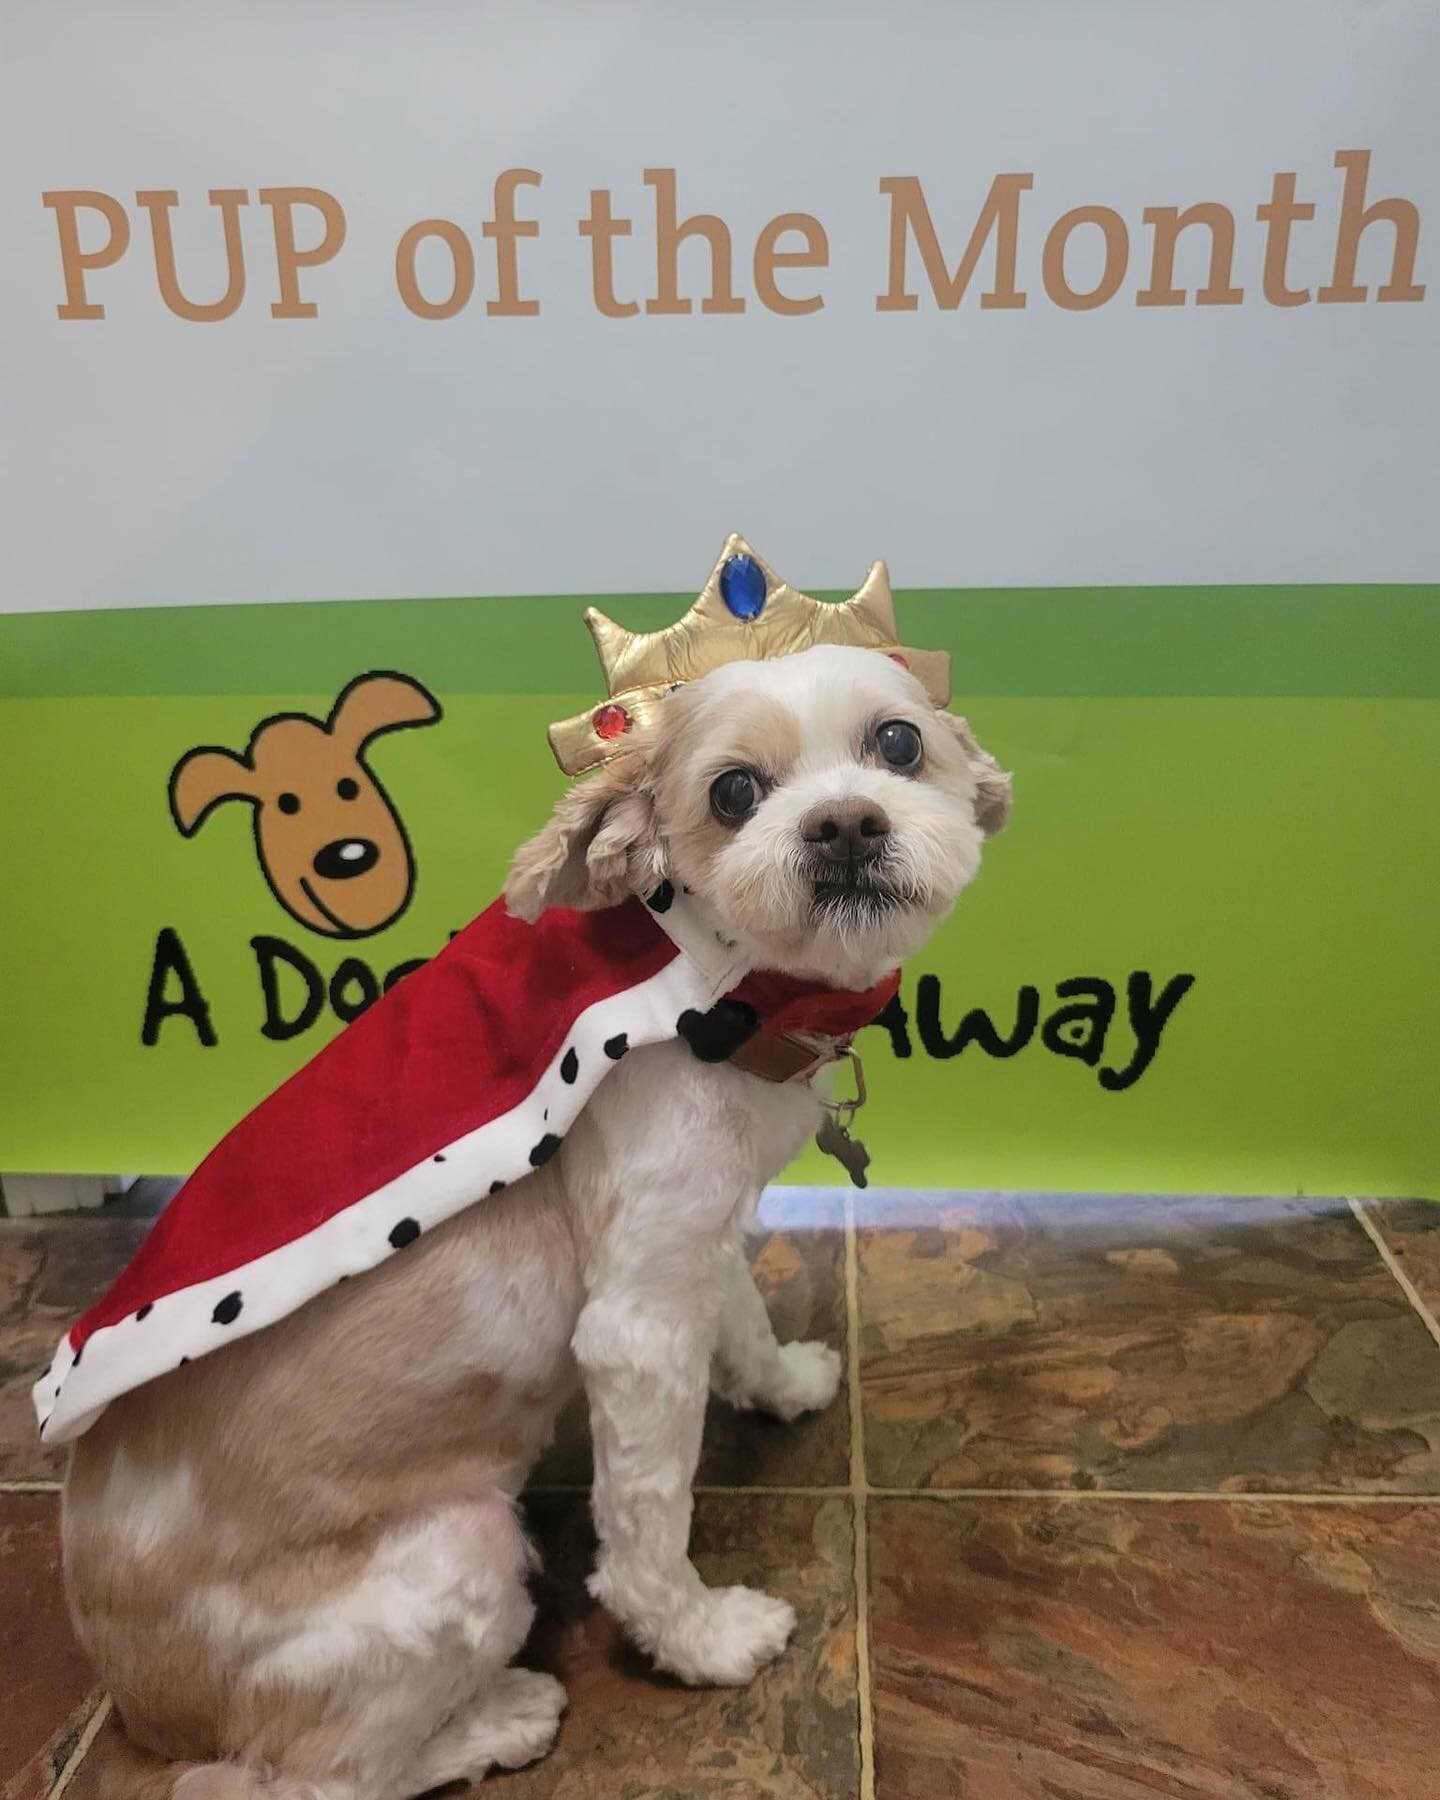 Mia is Class President AND Pup of the Month on my birthday month!! Whoohoo!!!! Thank you @adogsdayaway! #seniordogs #dog #seniordog #rescuedog #pupofthemonth